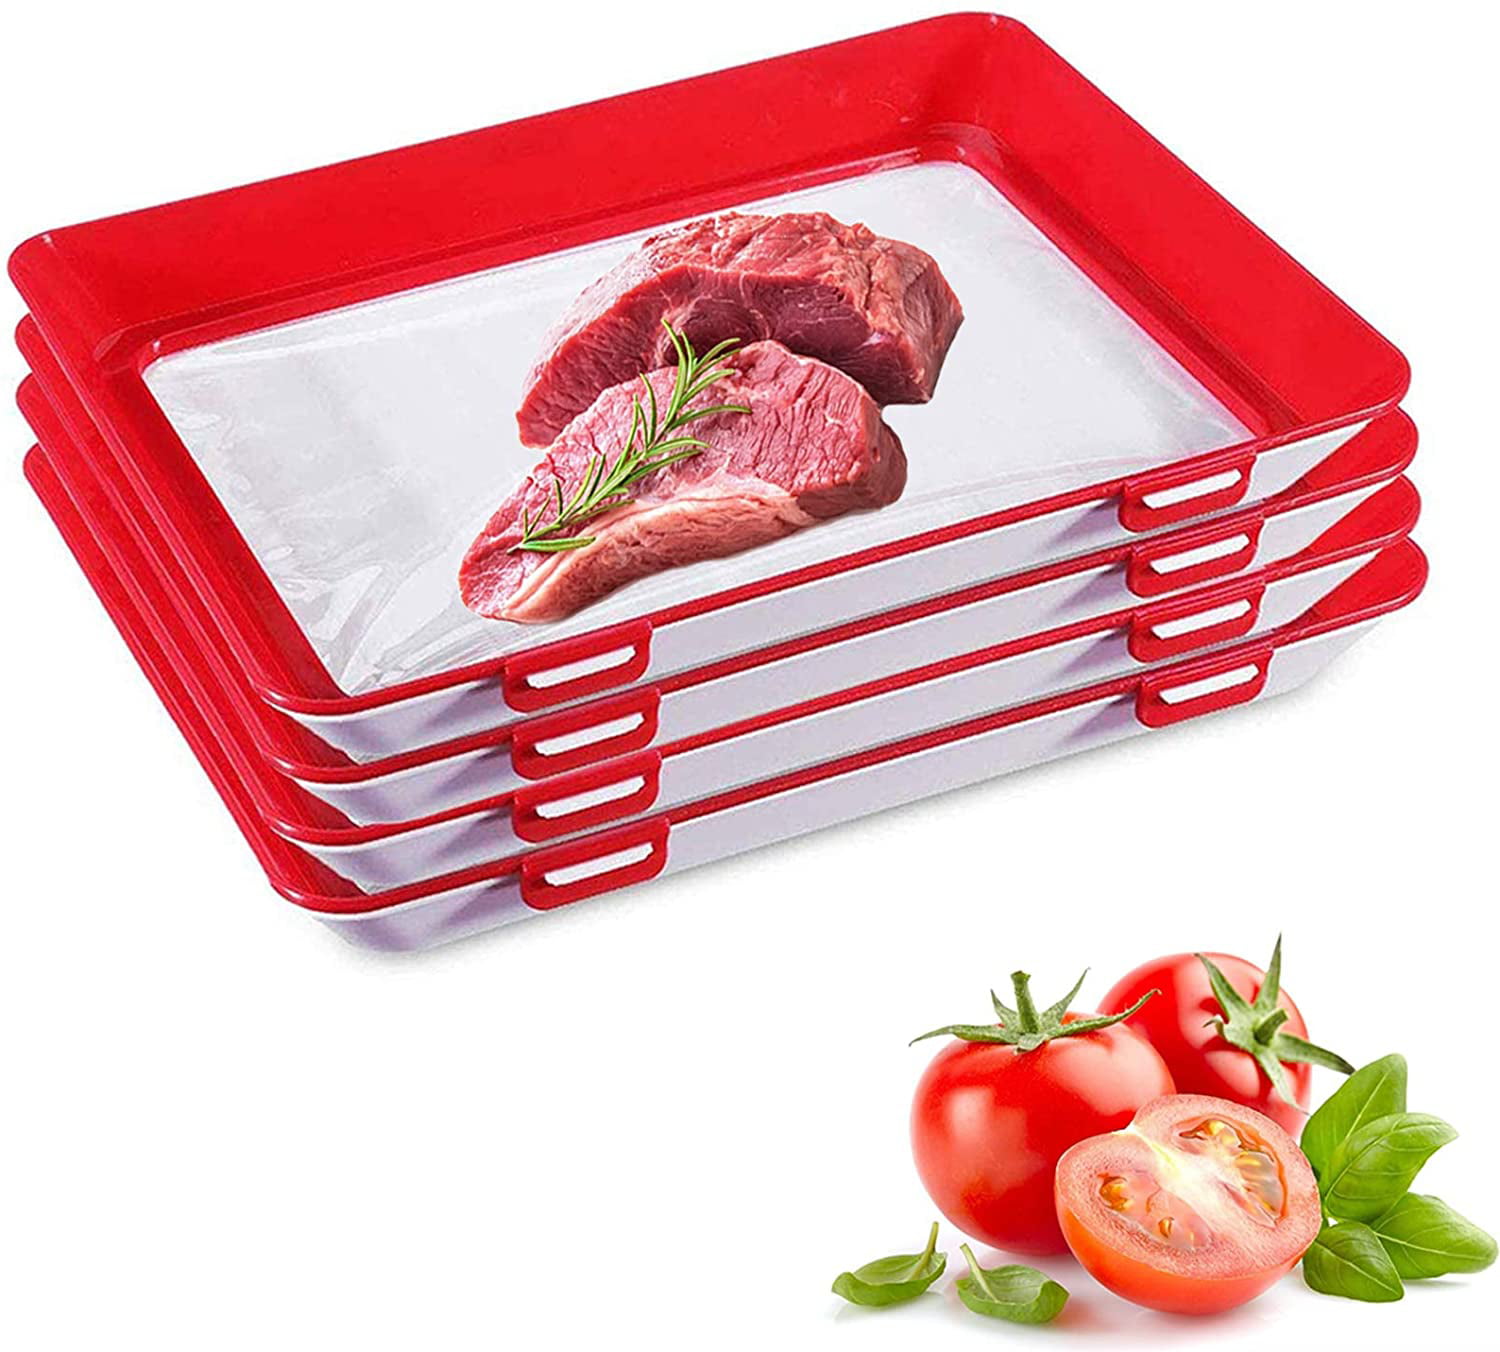 Grease-Proof Sturdy Food Trays 2 lb Capacity 100 Pack by Eucatus Serve Hot... 